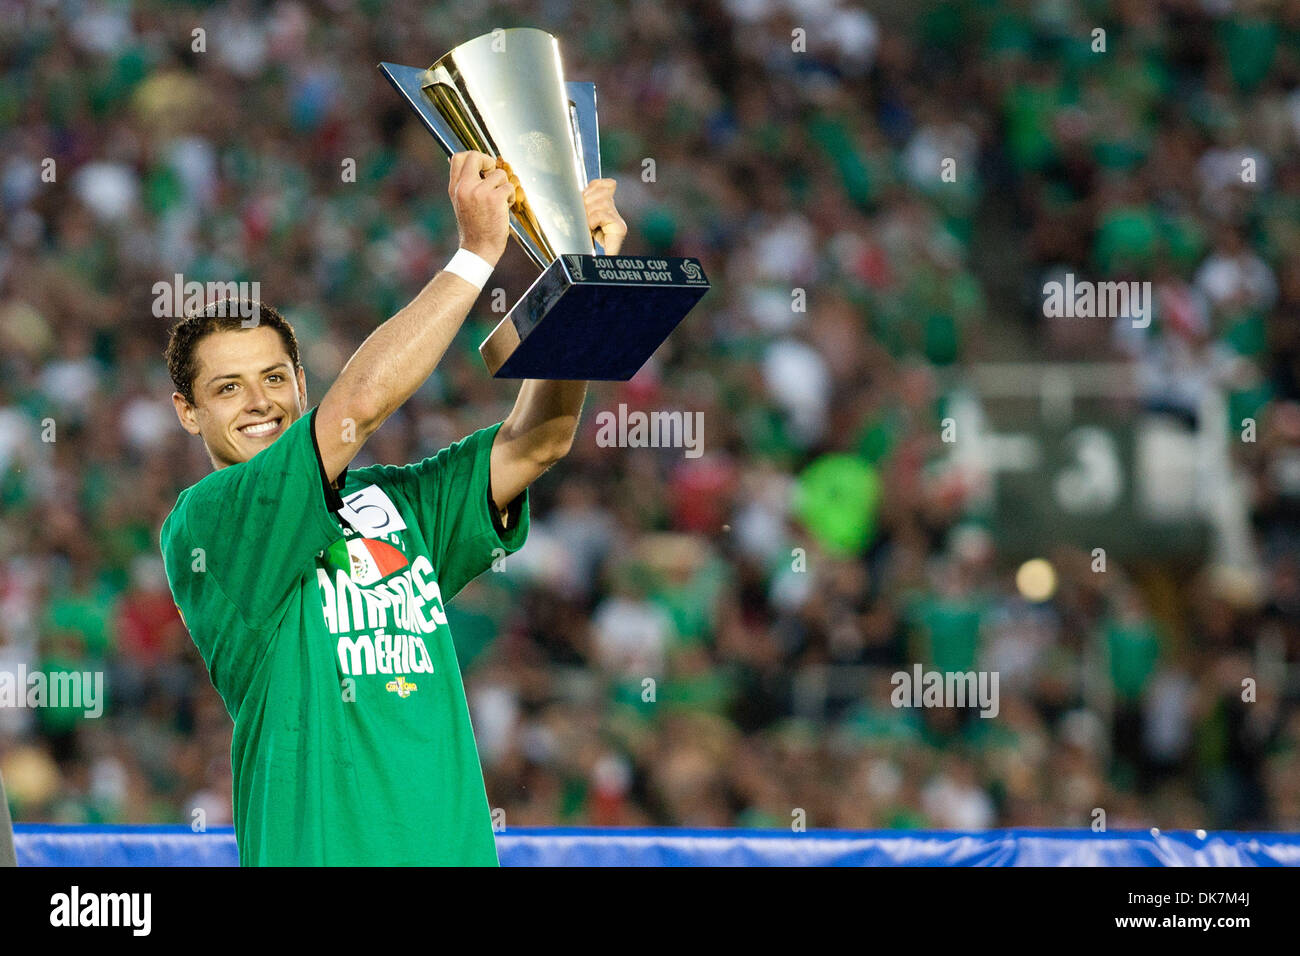 June 25, 2011 - Pasadena, California, U.S - Mexico forward Javier ''Chicharito'' Hernandez #14 receives the Golden Boot Award after the 2011 CONCACAF Gold Cup championship game between United States and Mexico at a sold out Rose Bowl. Mexico defeated United States with a final score of 4-2. (Credit Image: © Brandon Parry/Southcreek Global/ZUMAPRESS.com) Stock Photo